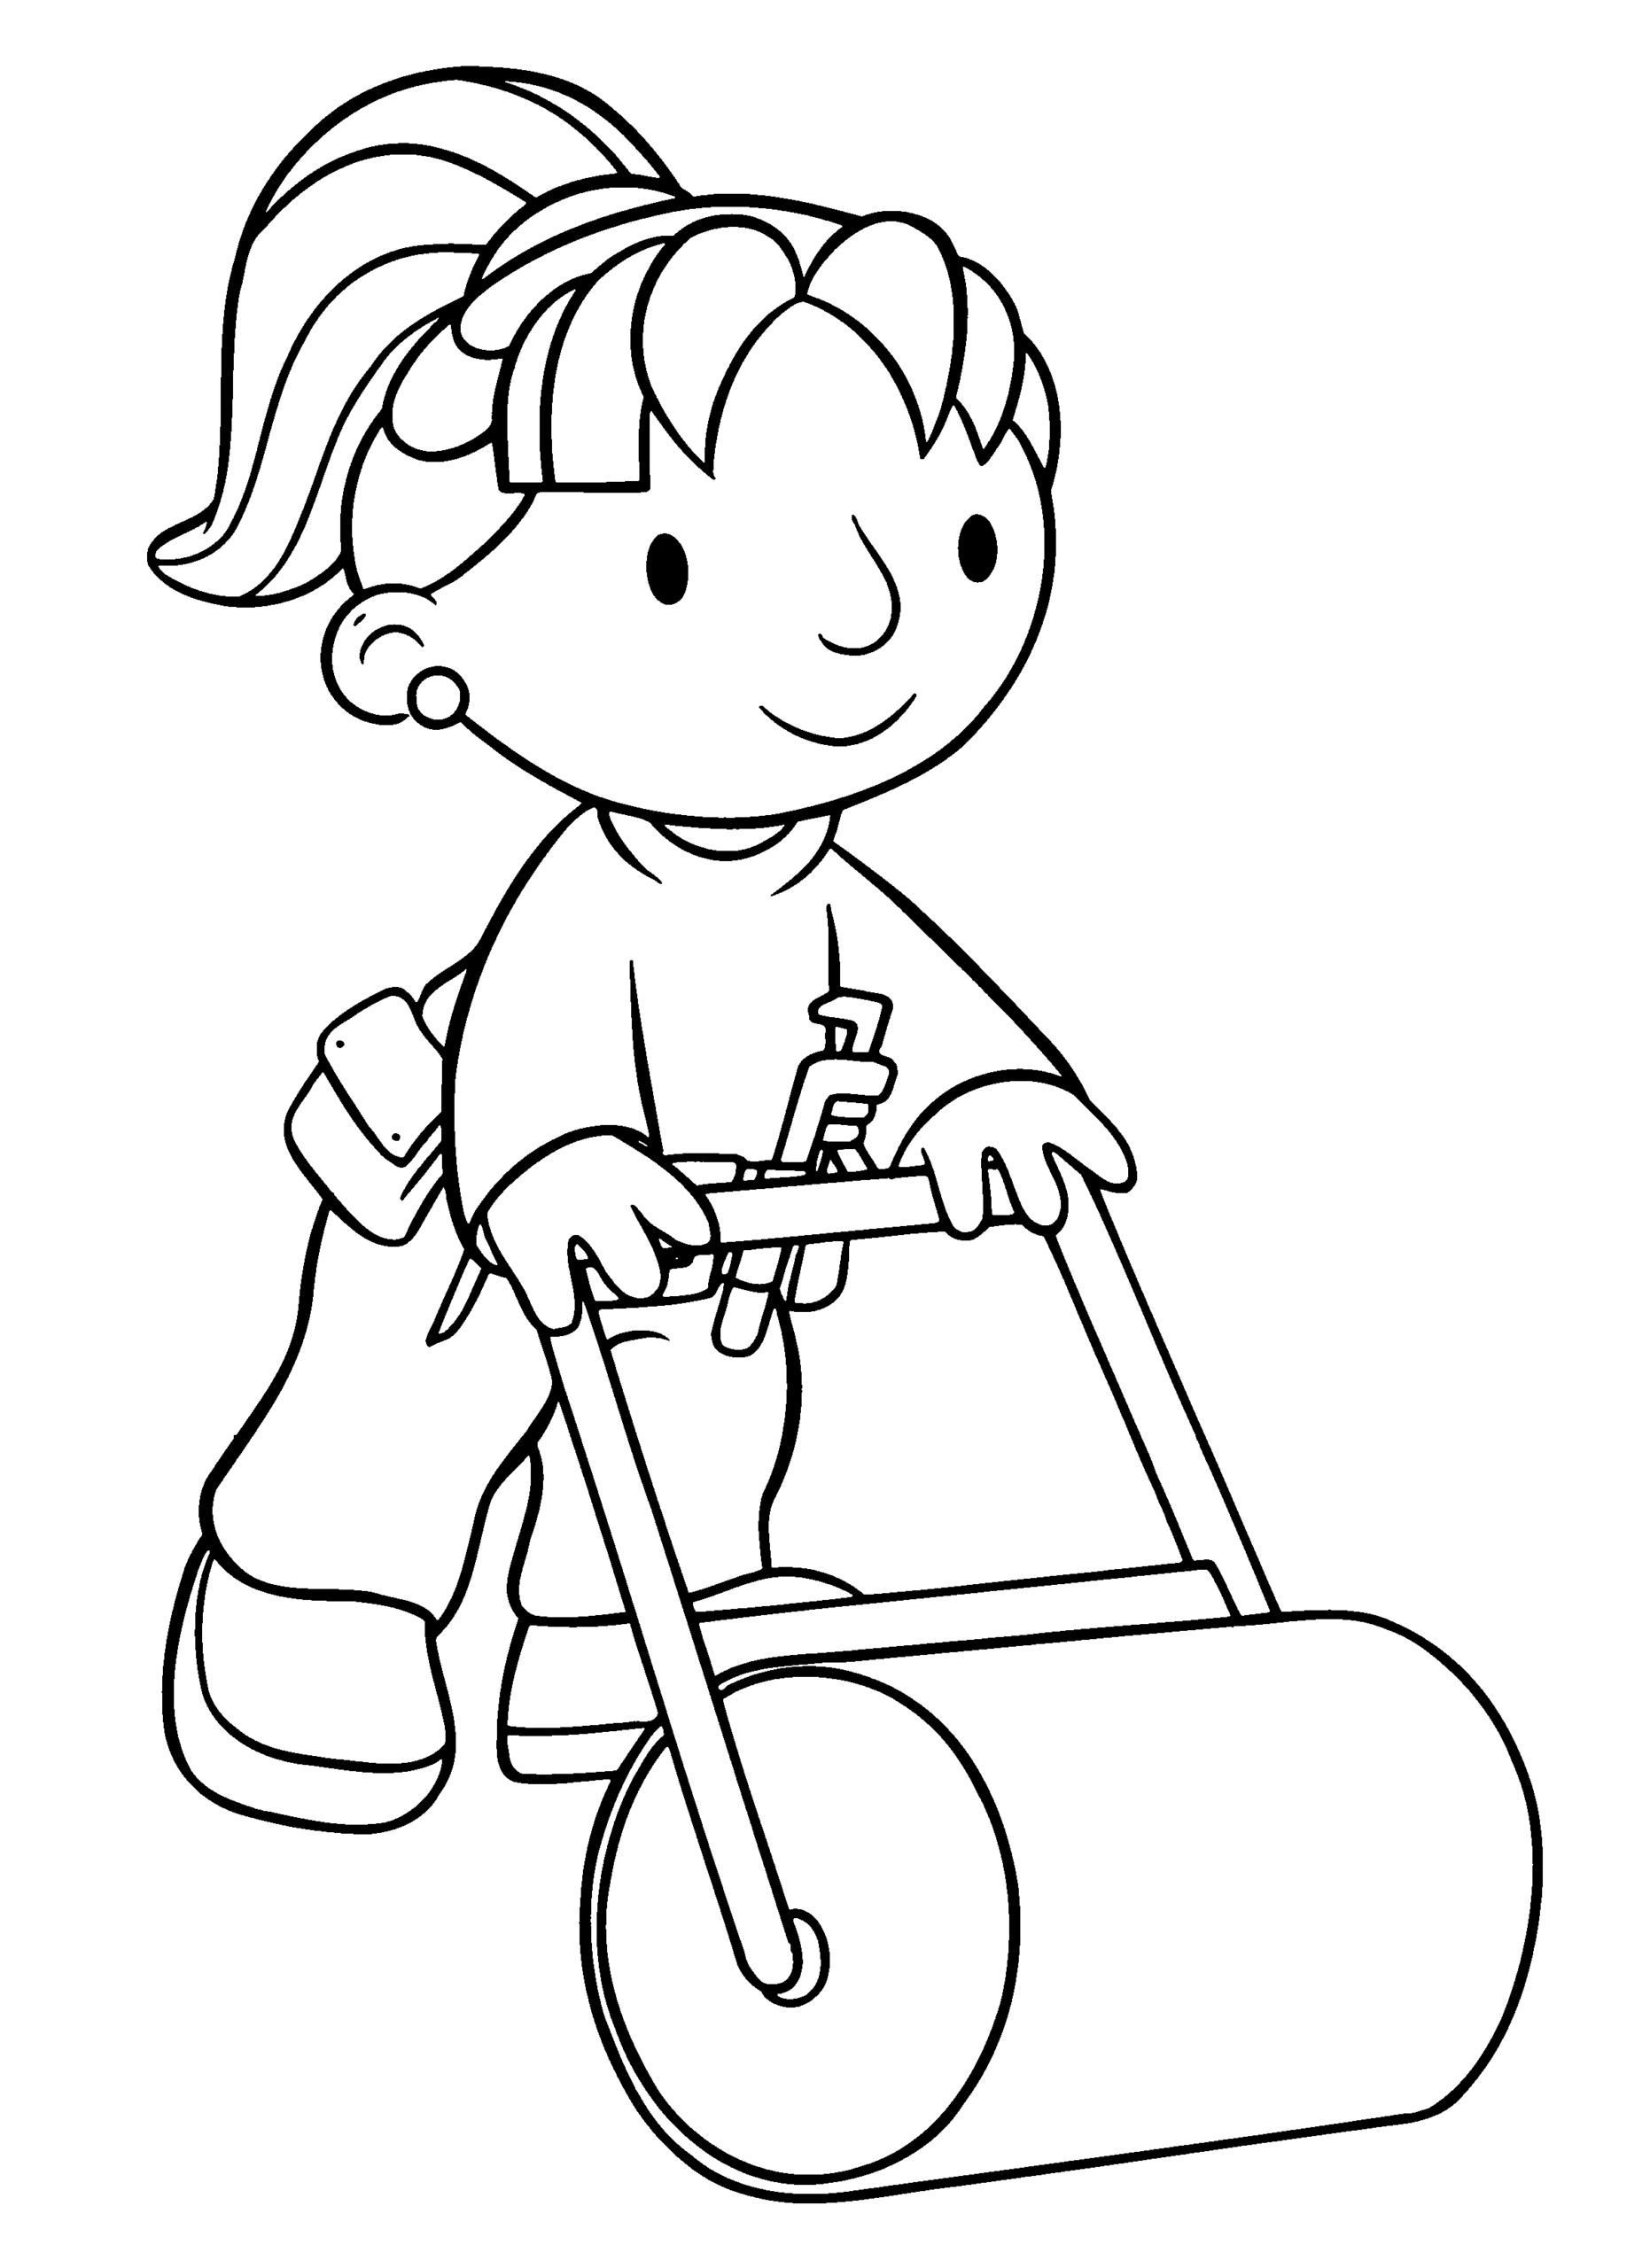 Bob the Builder Coloring Pages TV Film bob the builder 45 Printable 2020 01064 Coloring4free